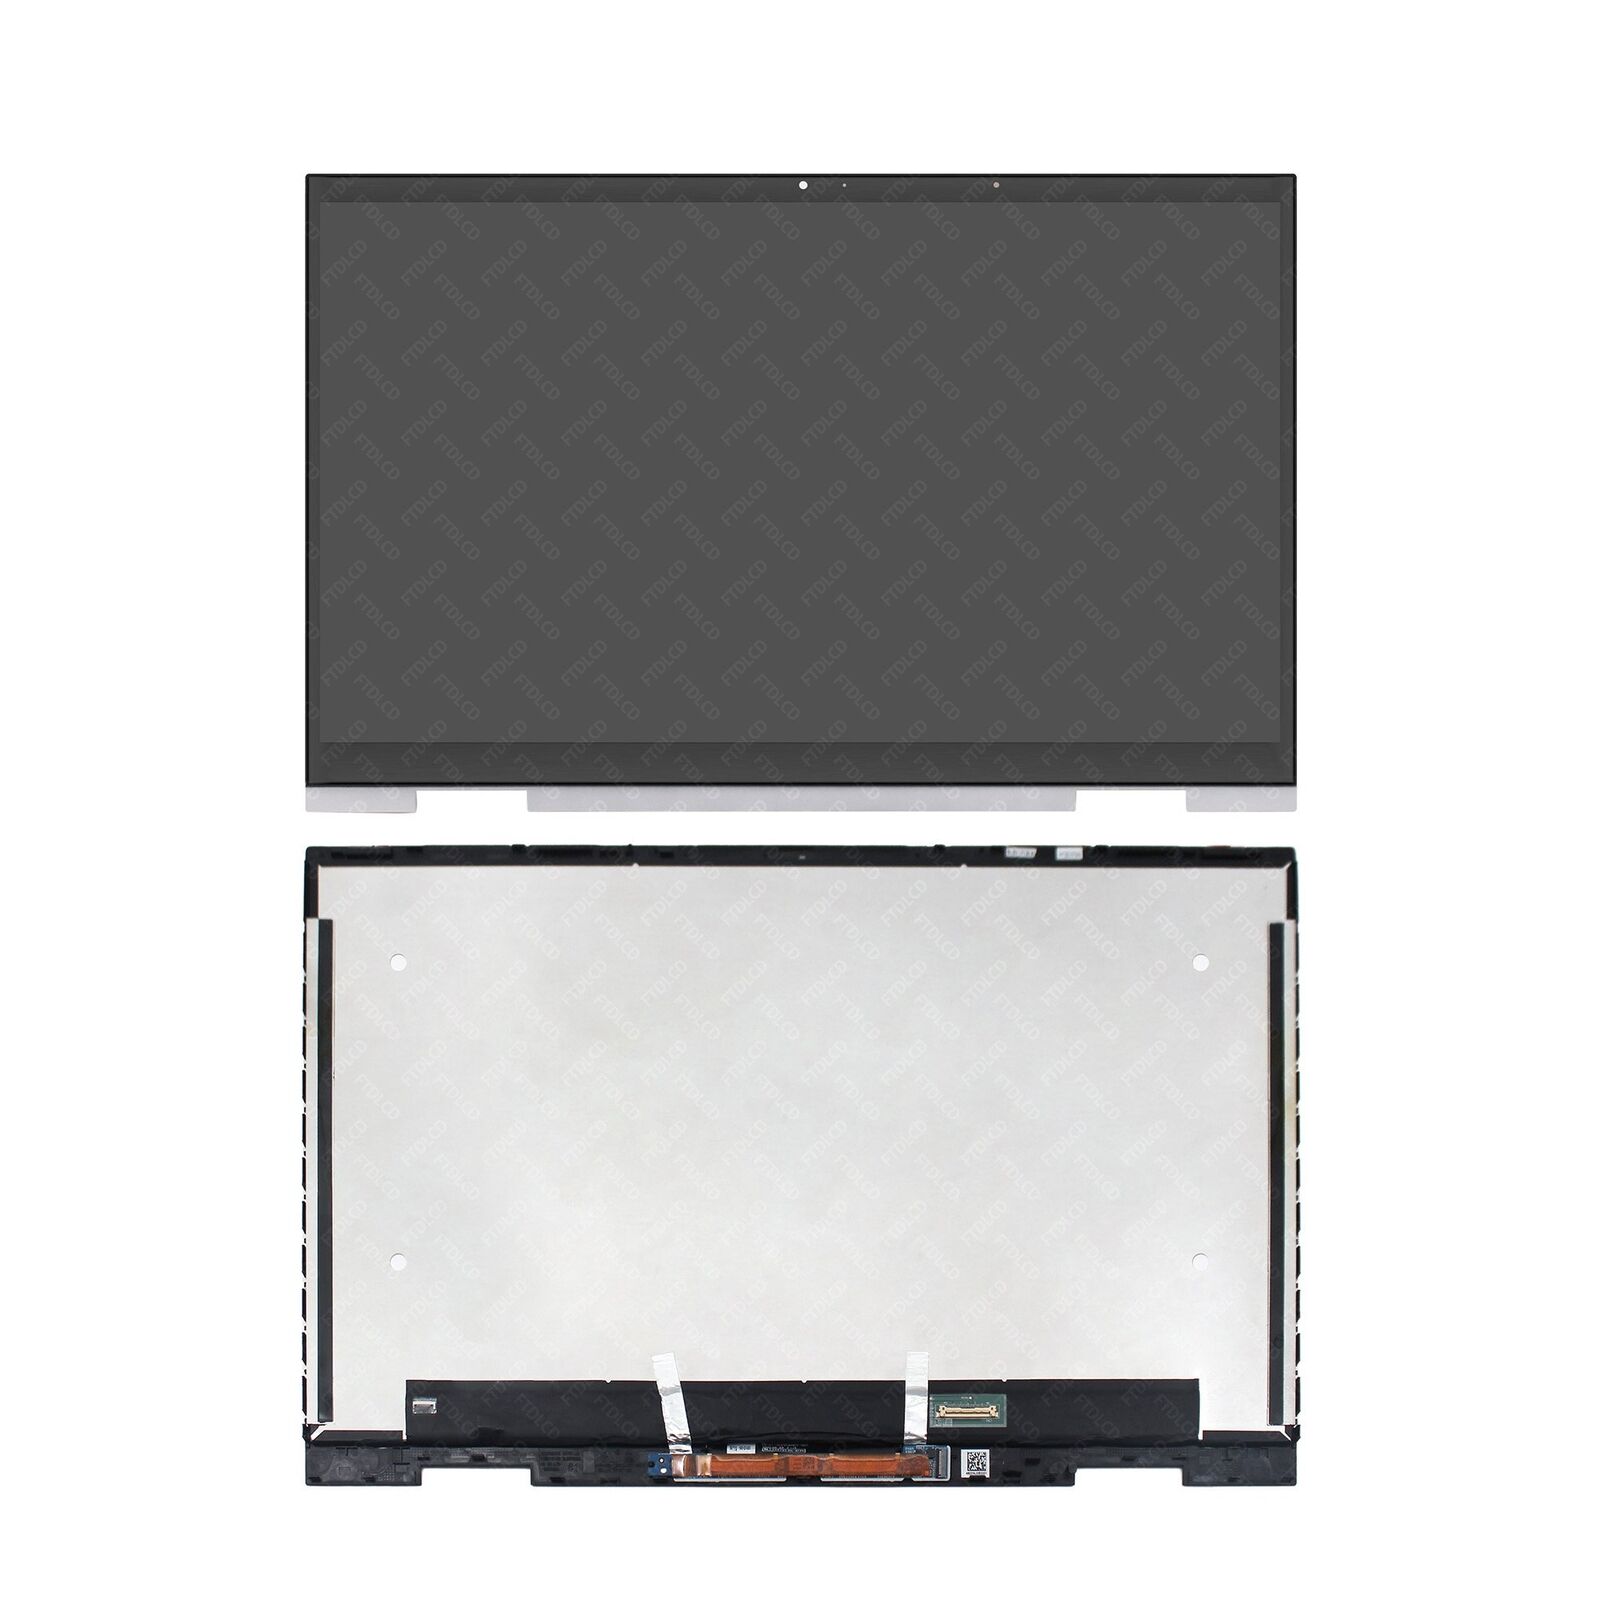 M45453-001 FHD LCD Display Touch Screen Assembly for HP Envy x360 15m-es1013dx